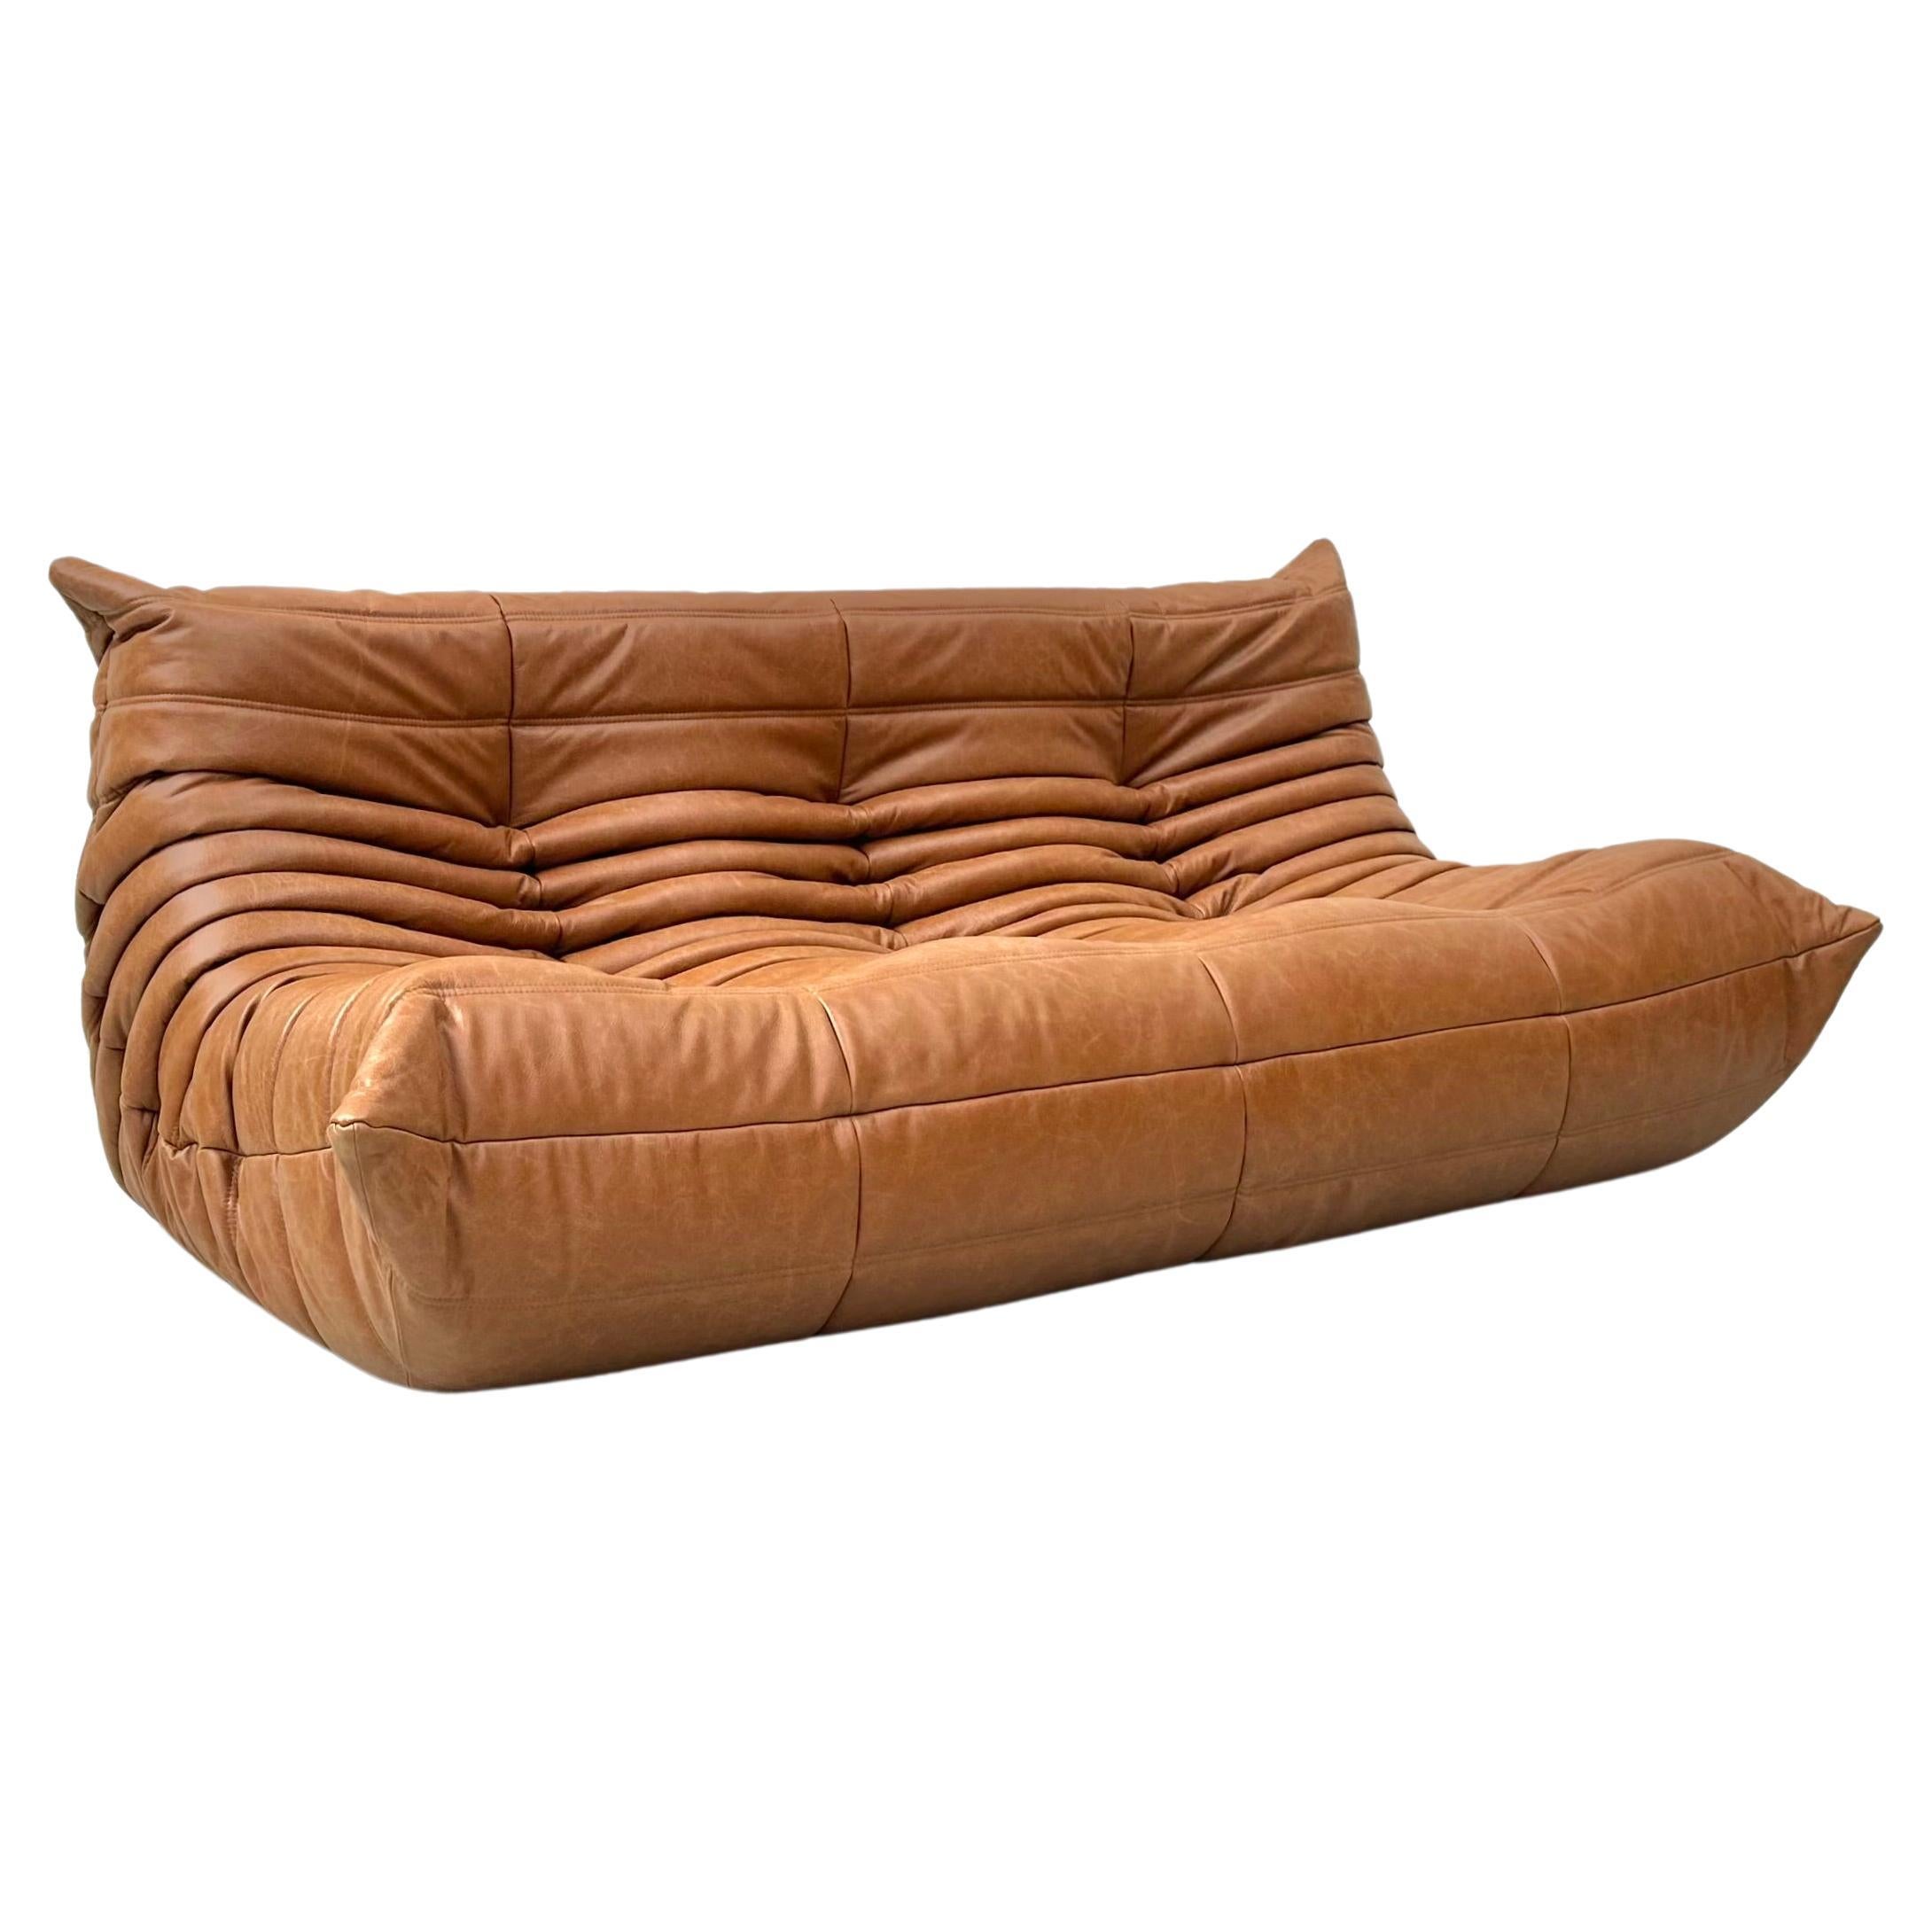 French Togo Sofa in Cognac  Leather by Michel Ducaroy for Ligne Roset.